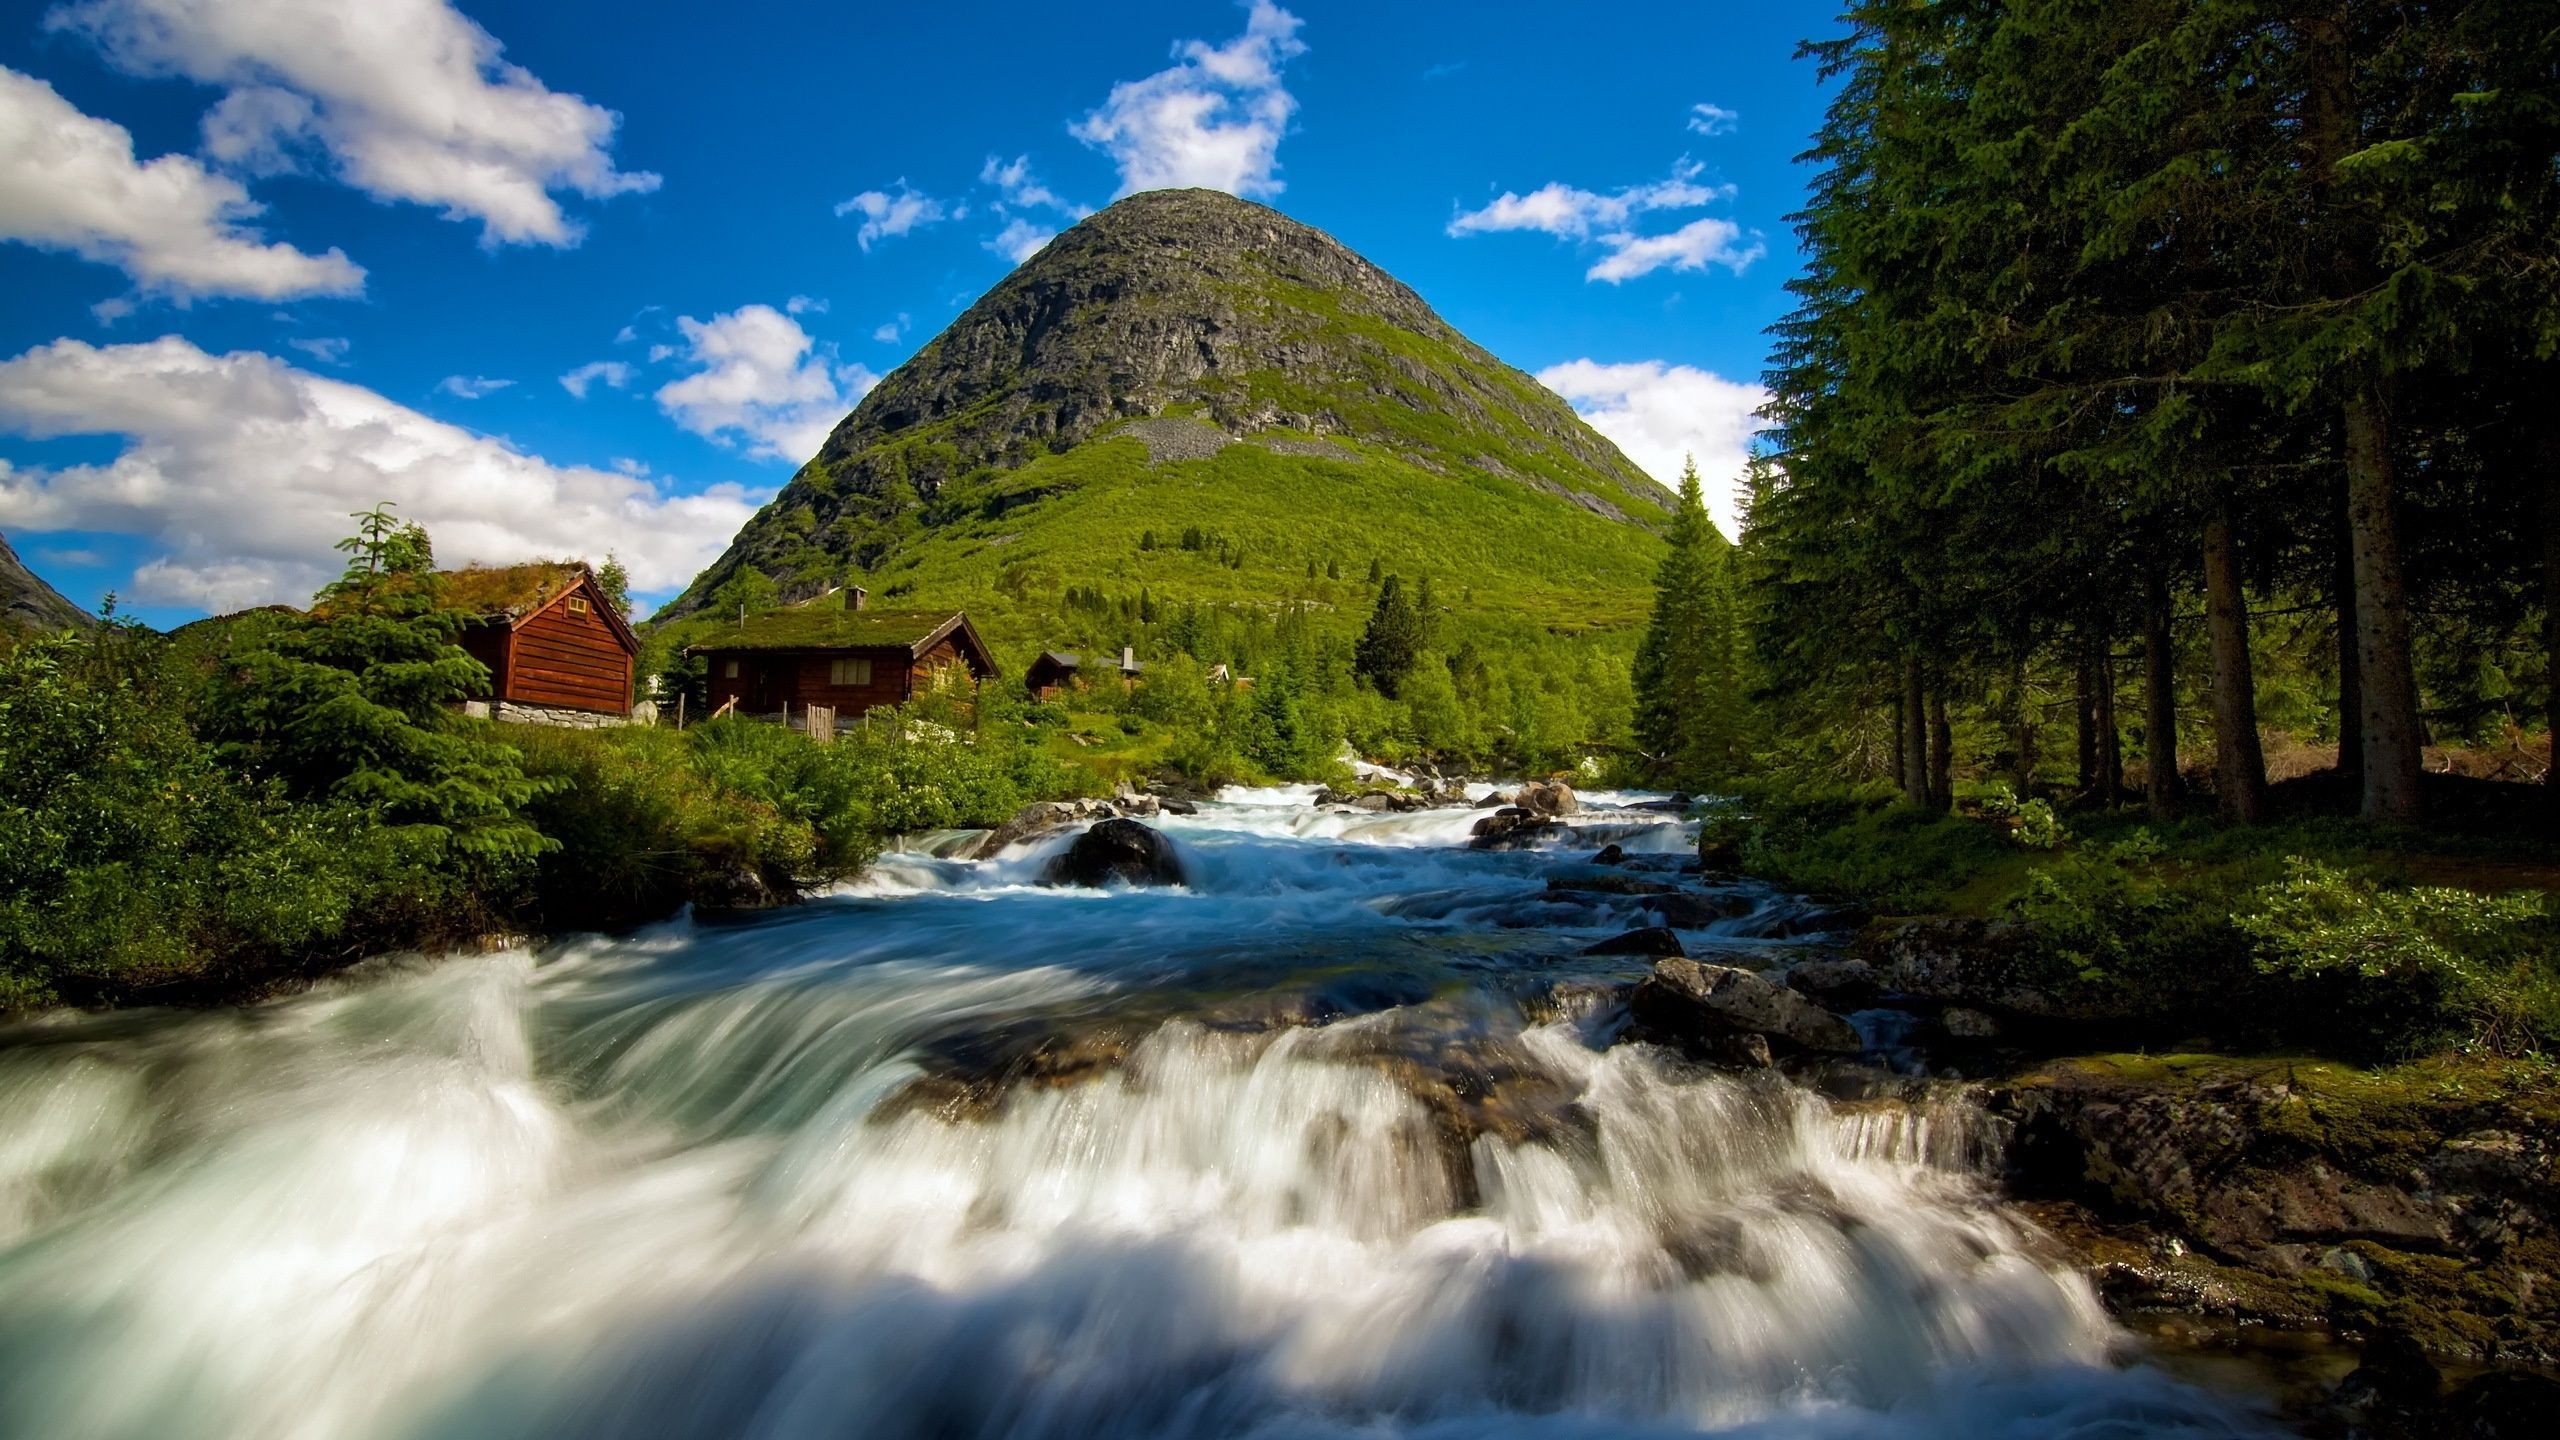 General 2560x1440 landscape waterfall nature hills river water Norway